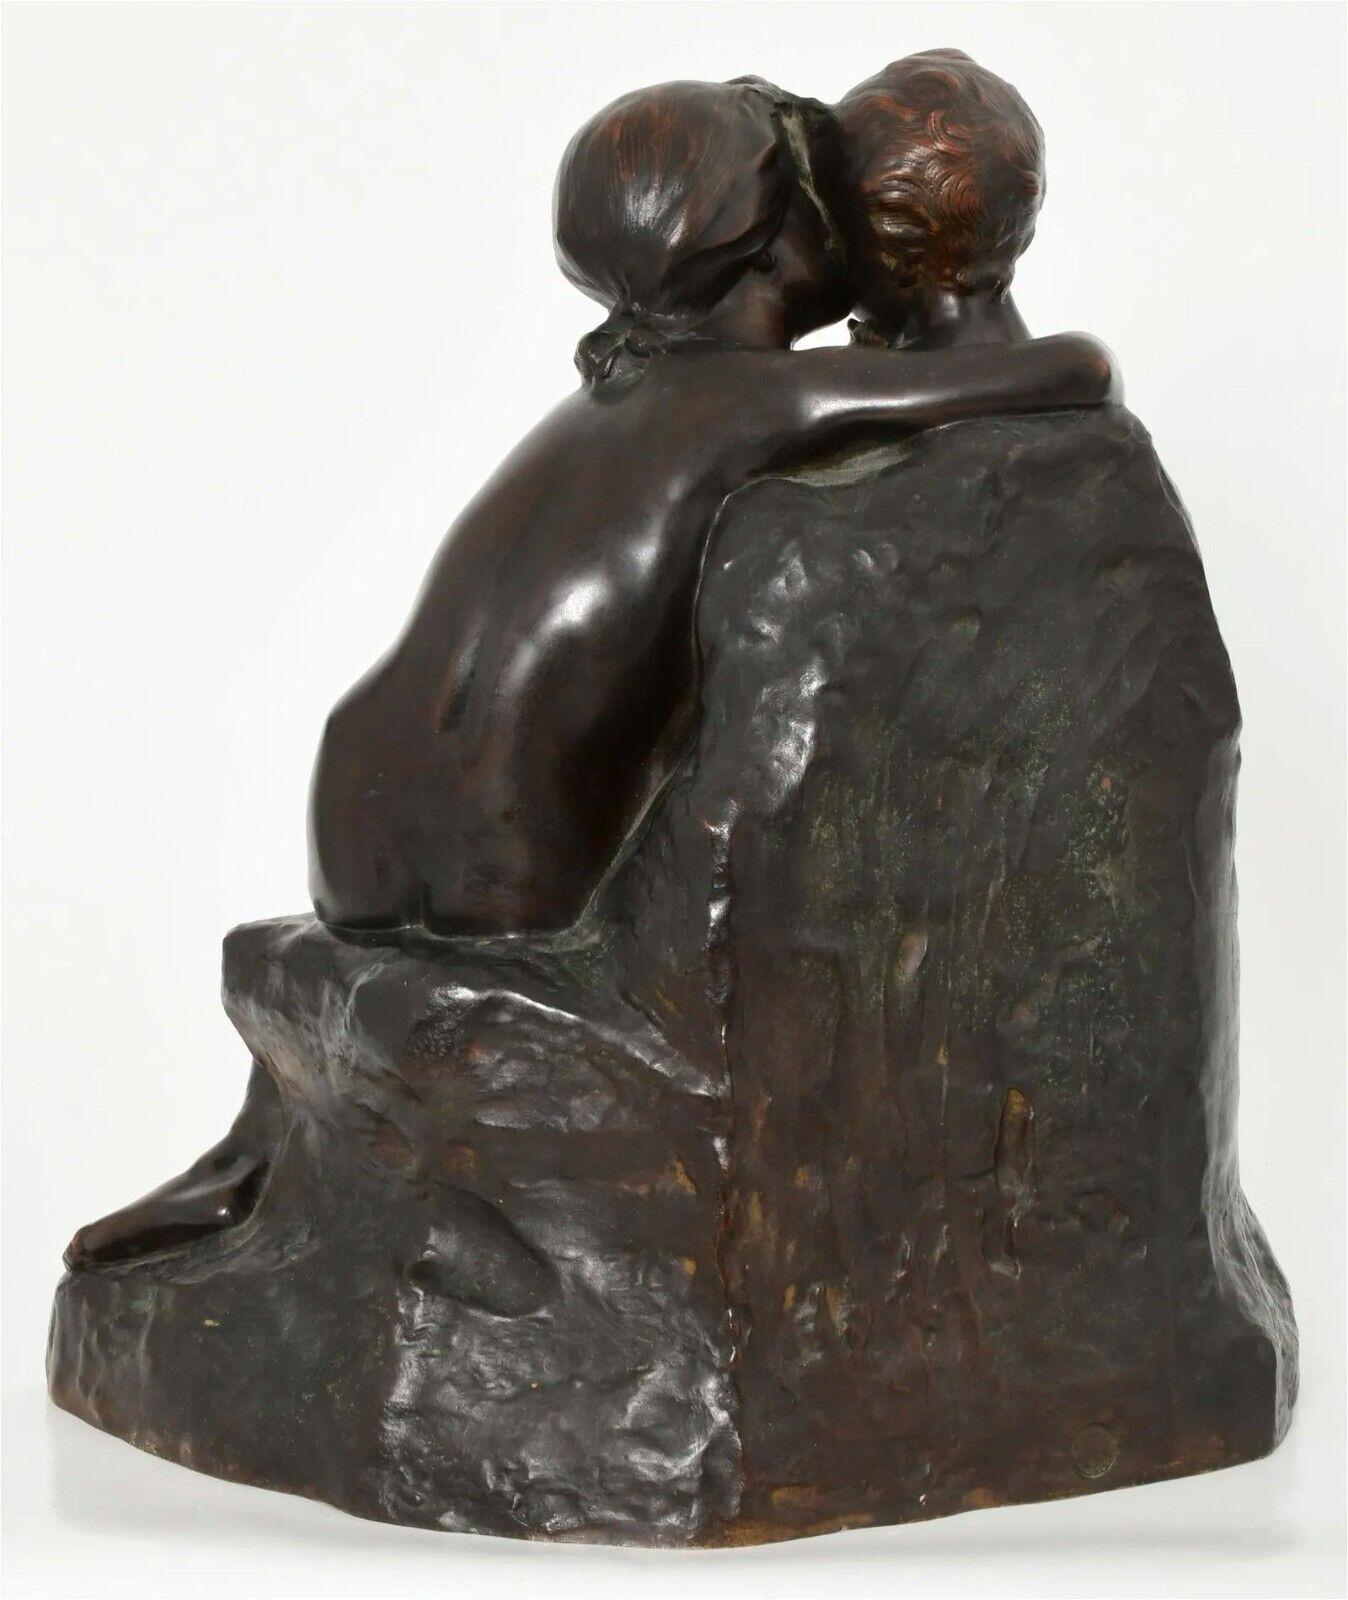 20th Century Antique French Bronze Sculpture of Sisters by Henri Pernot (1859-1937) For Sale